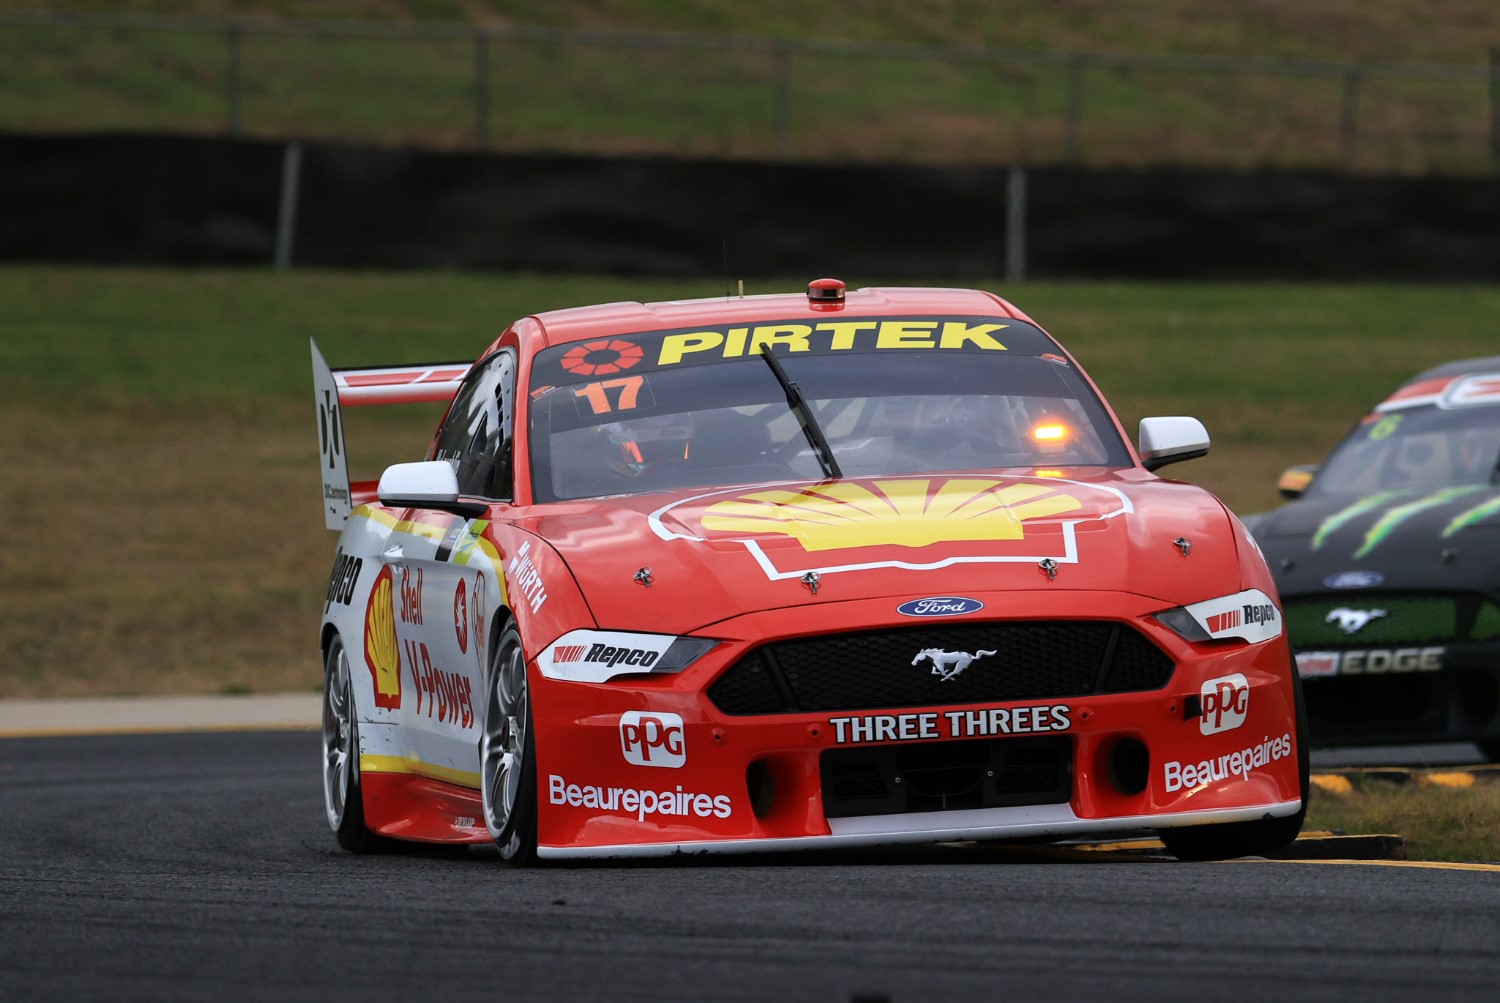 The DJR Team Penske Mustangs have proven hard to beat